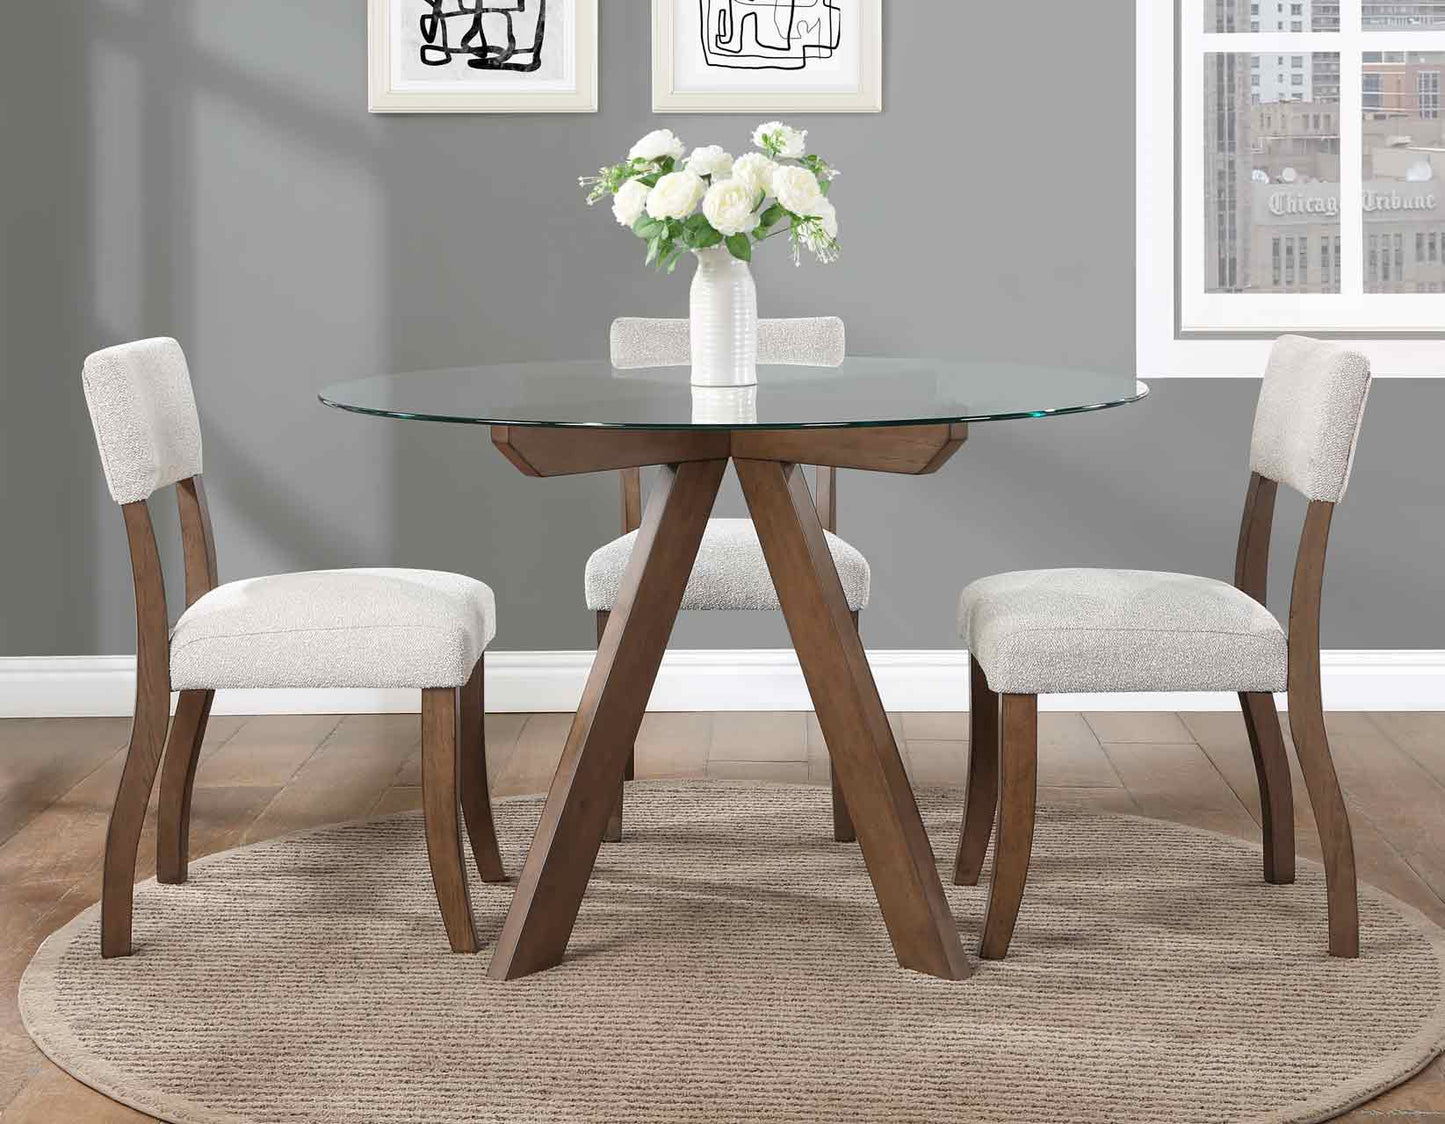 Wade 48-inch Glass Top 5-Piece Dining Set
(Table & 4 Side Chairs)